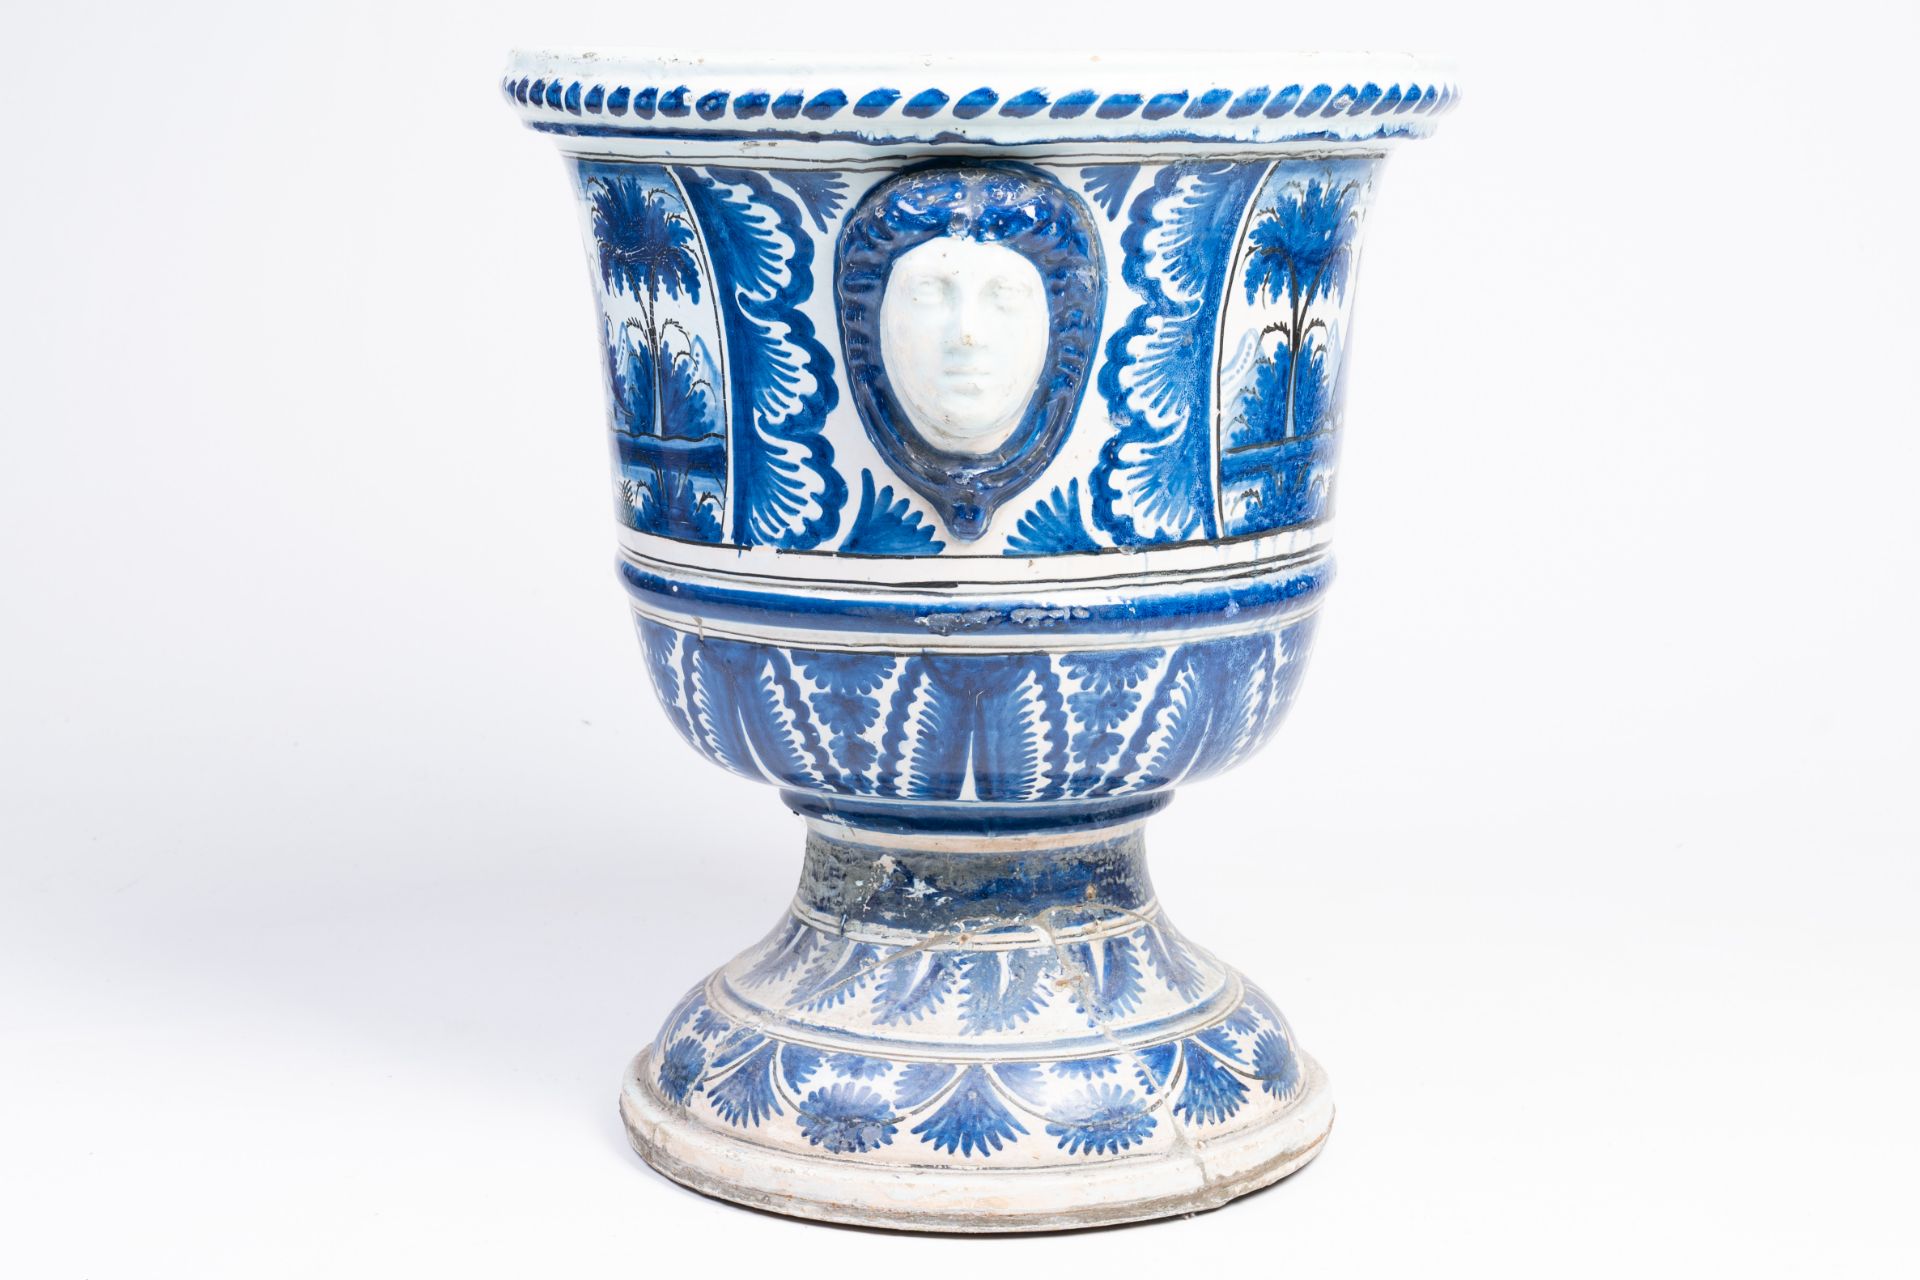 A large French blue and white earthenware Louis XIV vase on stand with oriental landscapes and masca - Image 2 of 6